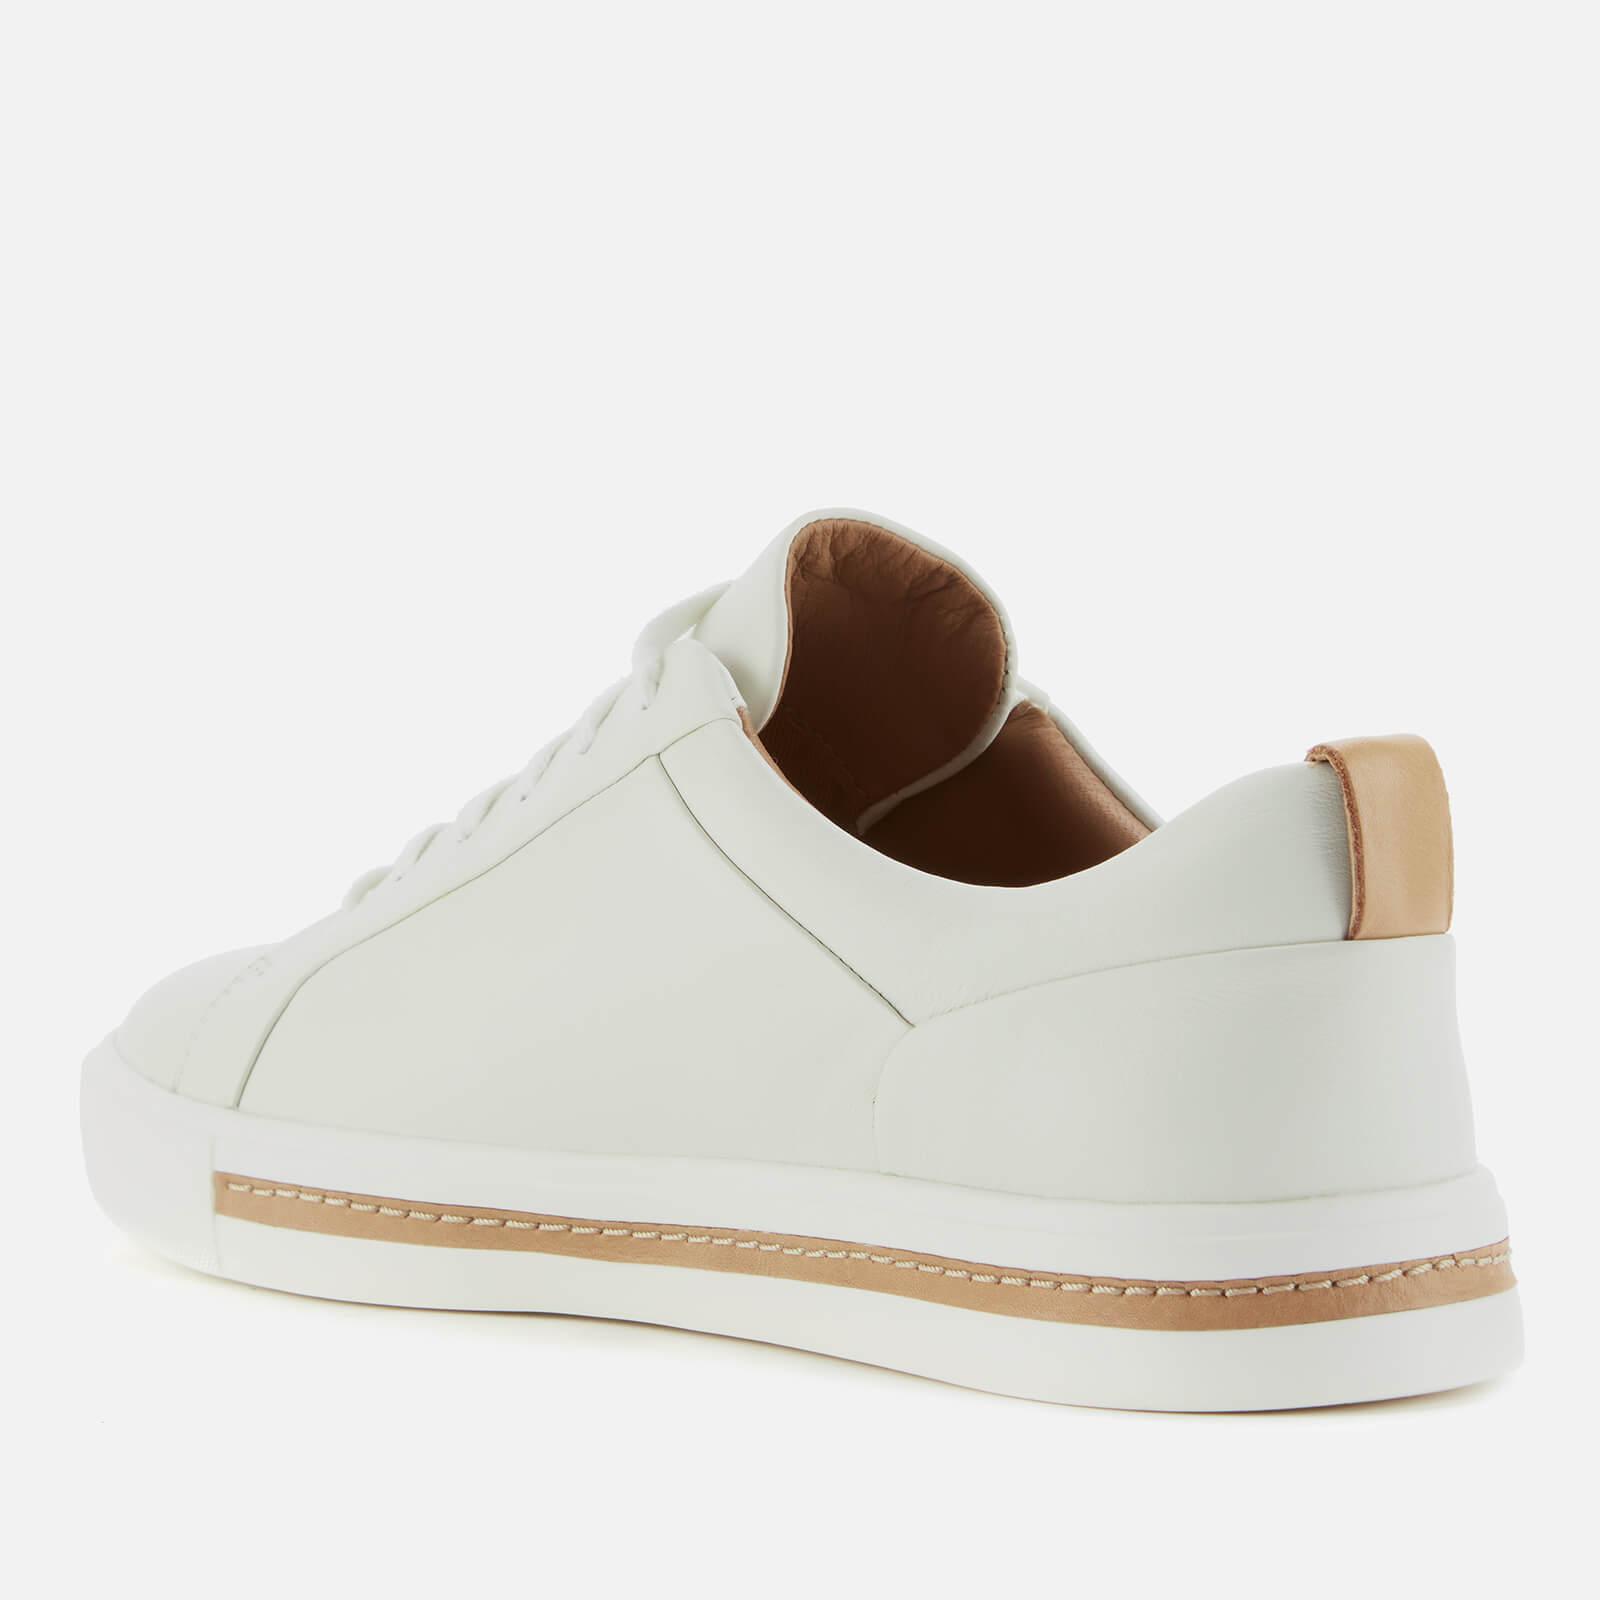 Clarks Un Maui Lace Leather Cupsole Trainers in White | Lyst